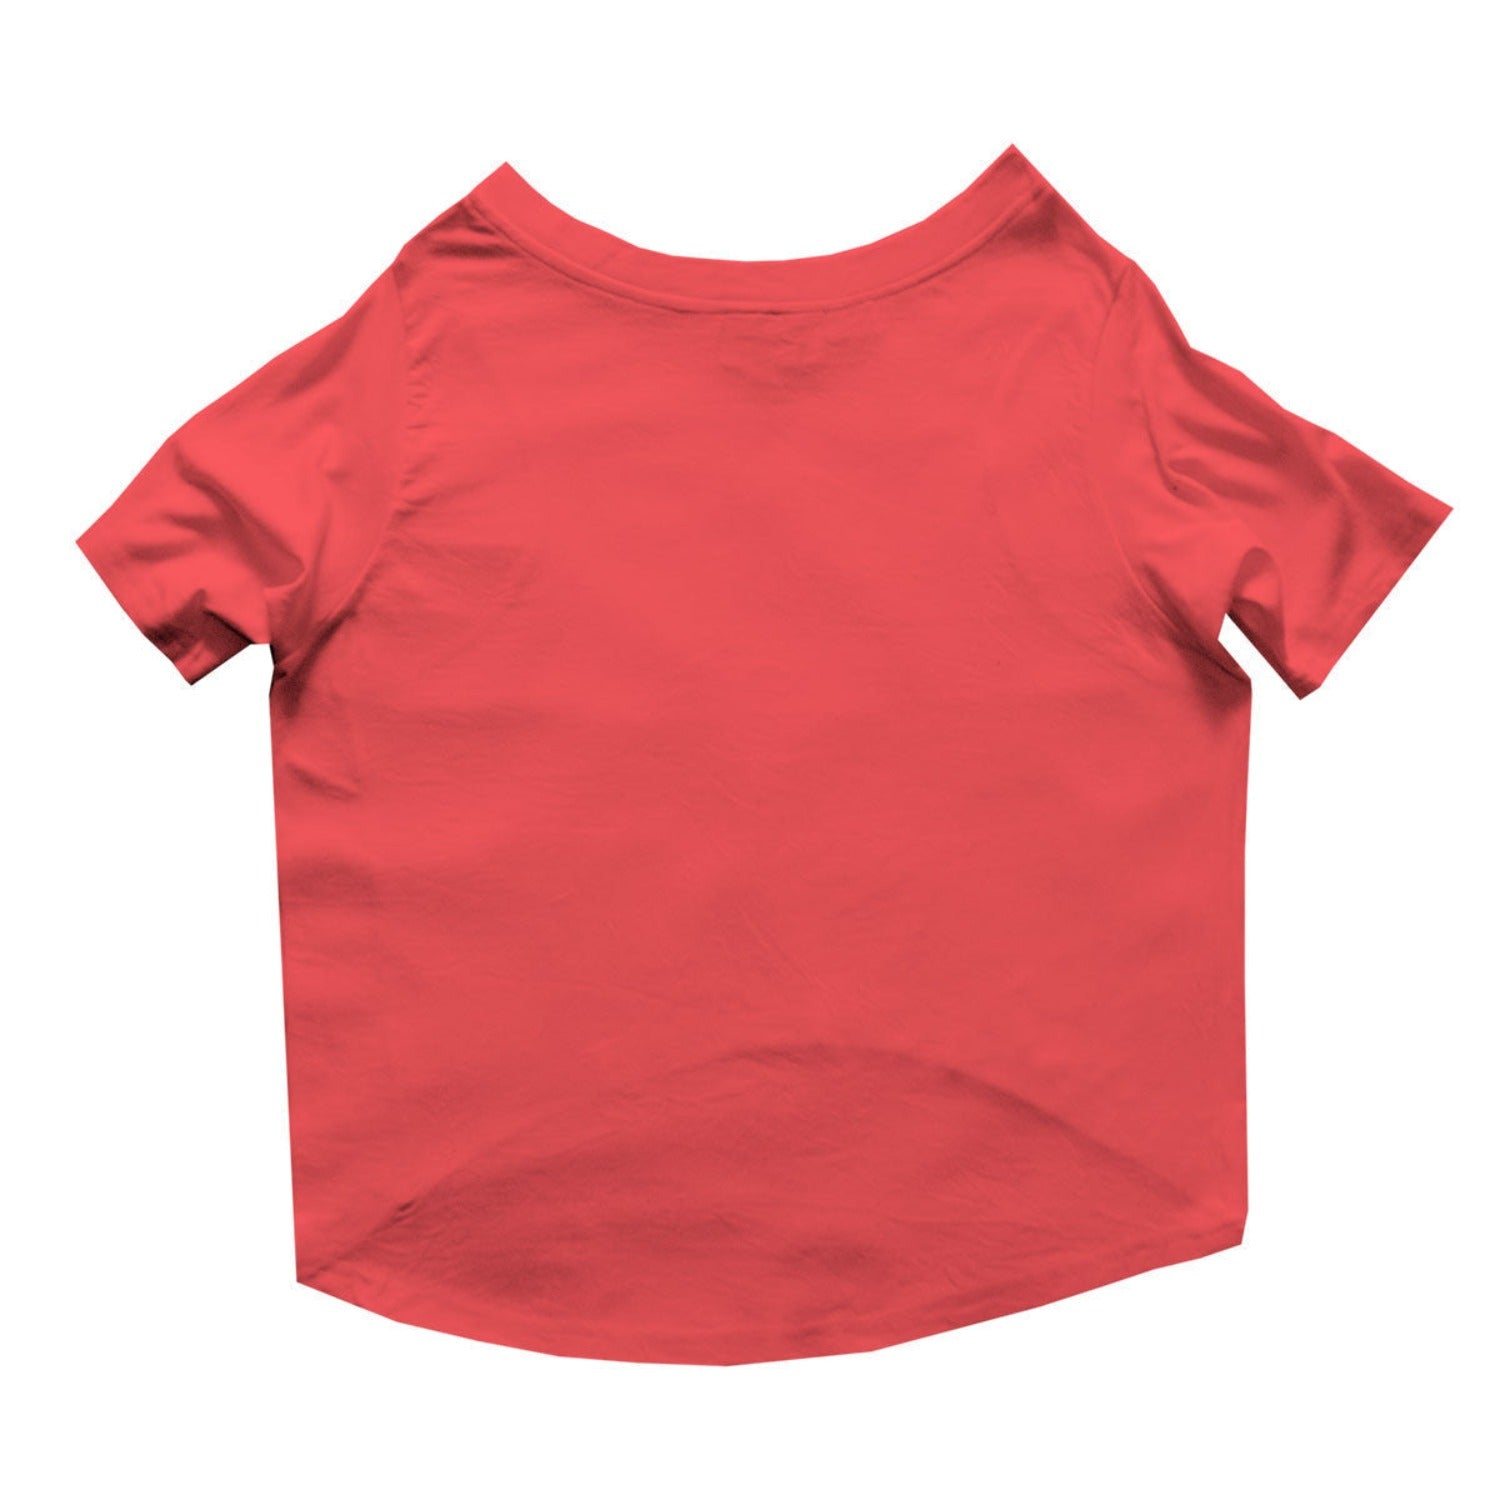 Ruse / Poppy Red Ruse Basic Crew Neck "COMBI ABDUCTION" Printed Half Sleeves Dog Tee24